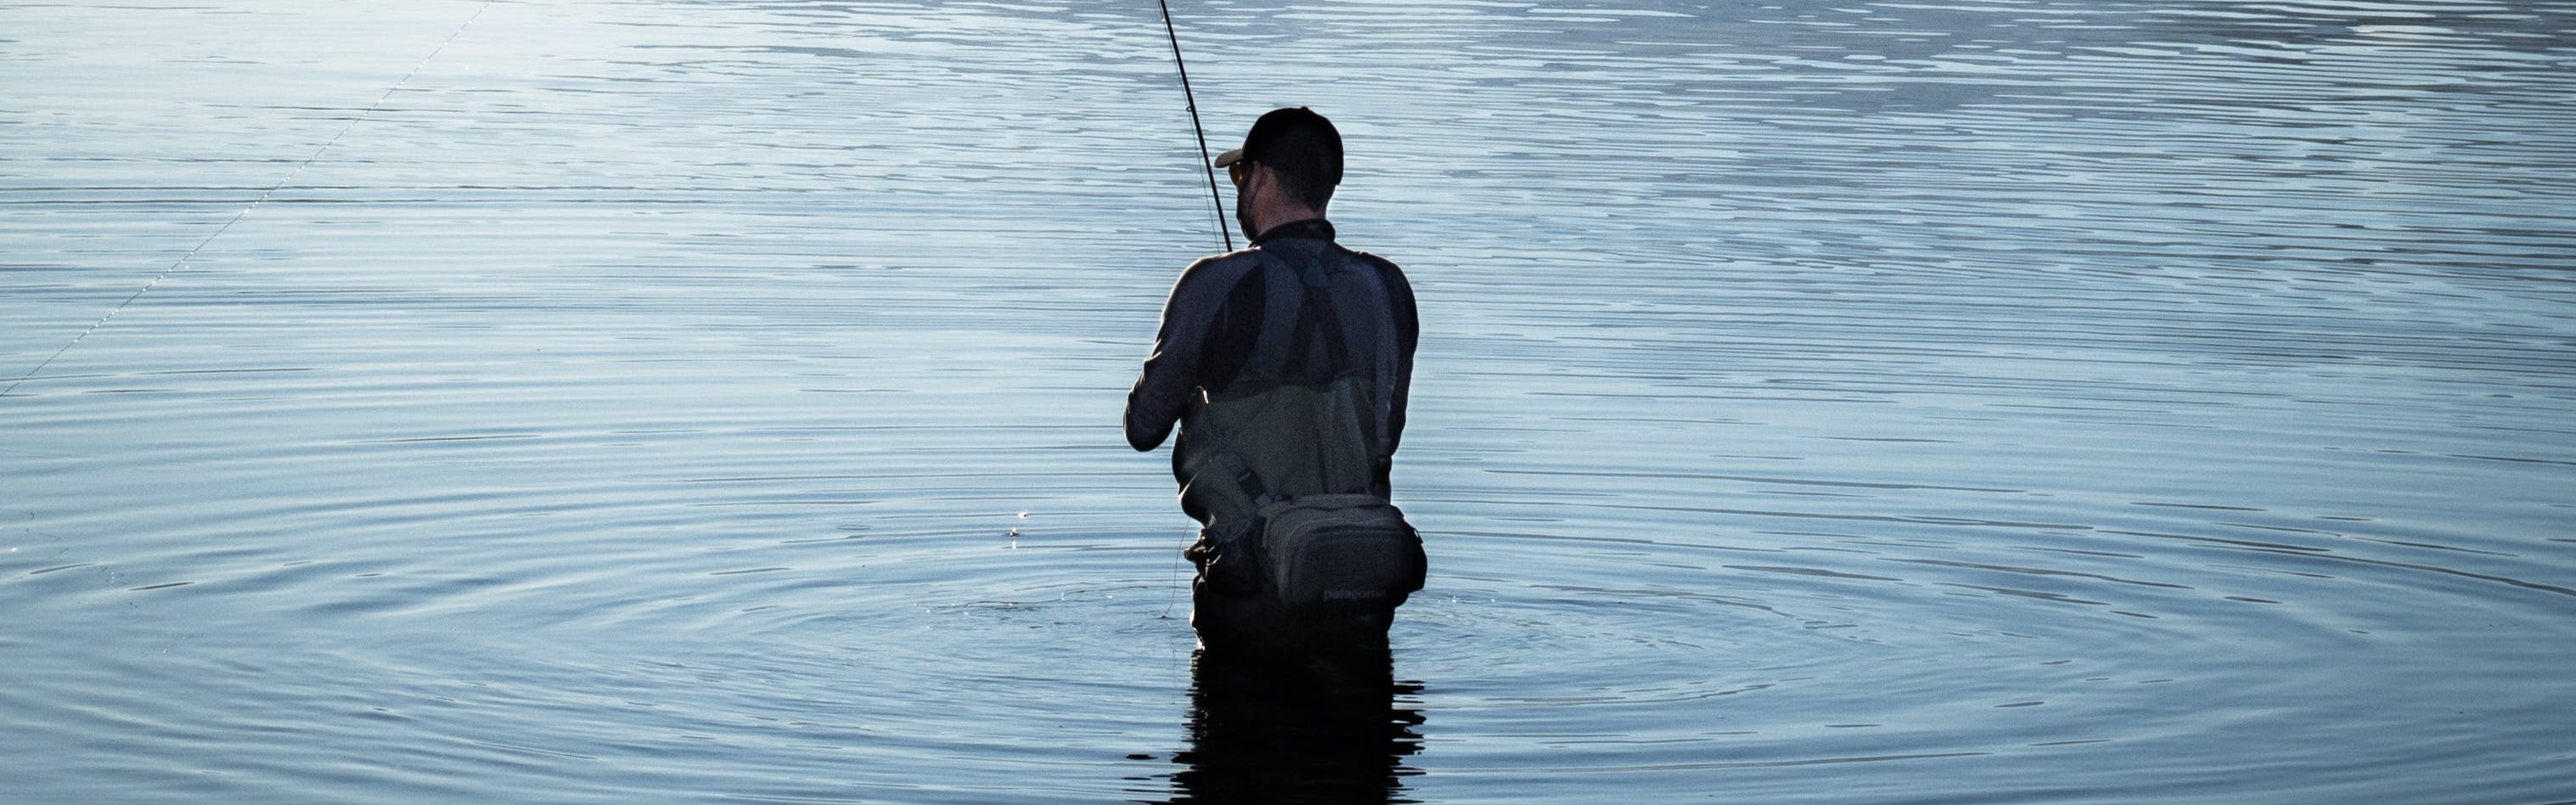 A fly fisher wearing waders stands in a body of water with his fishing rod.